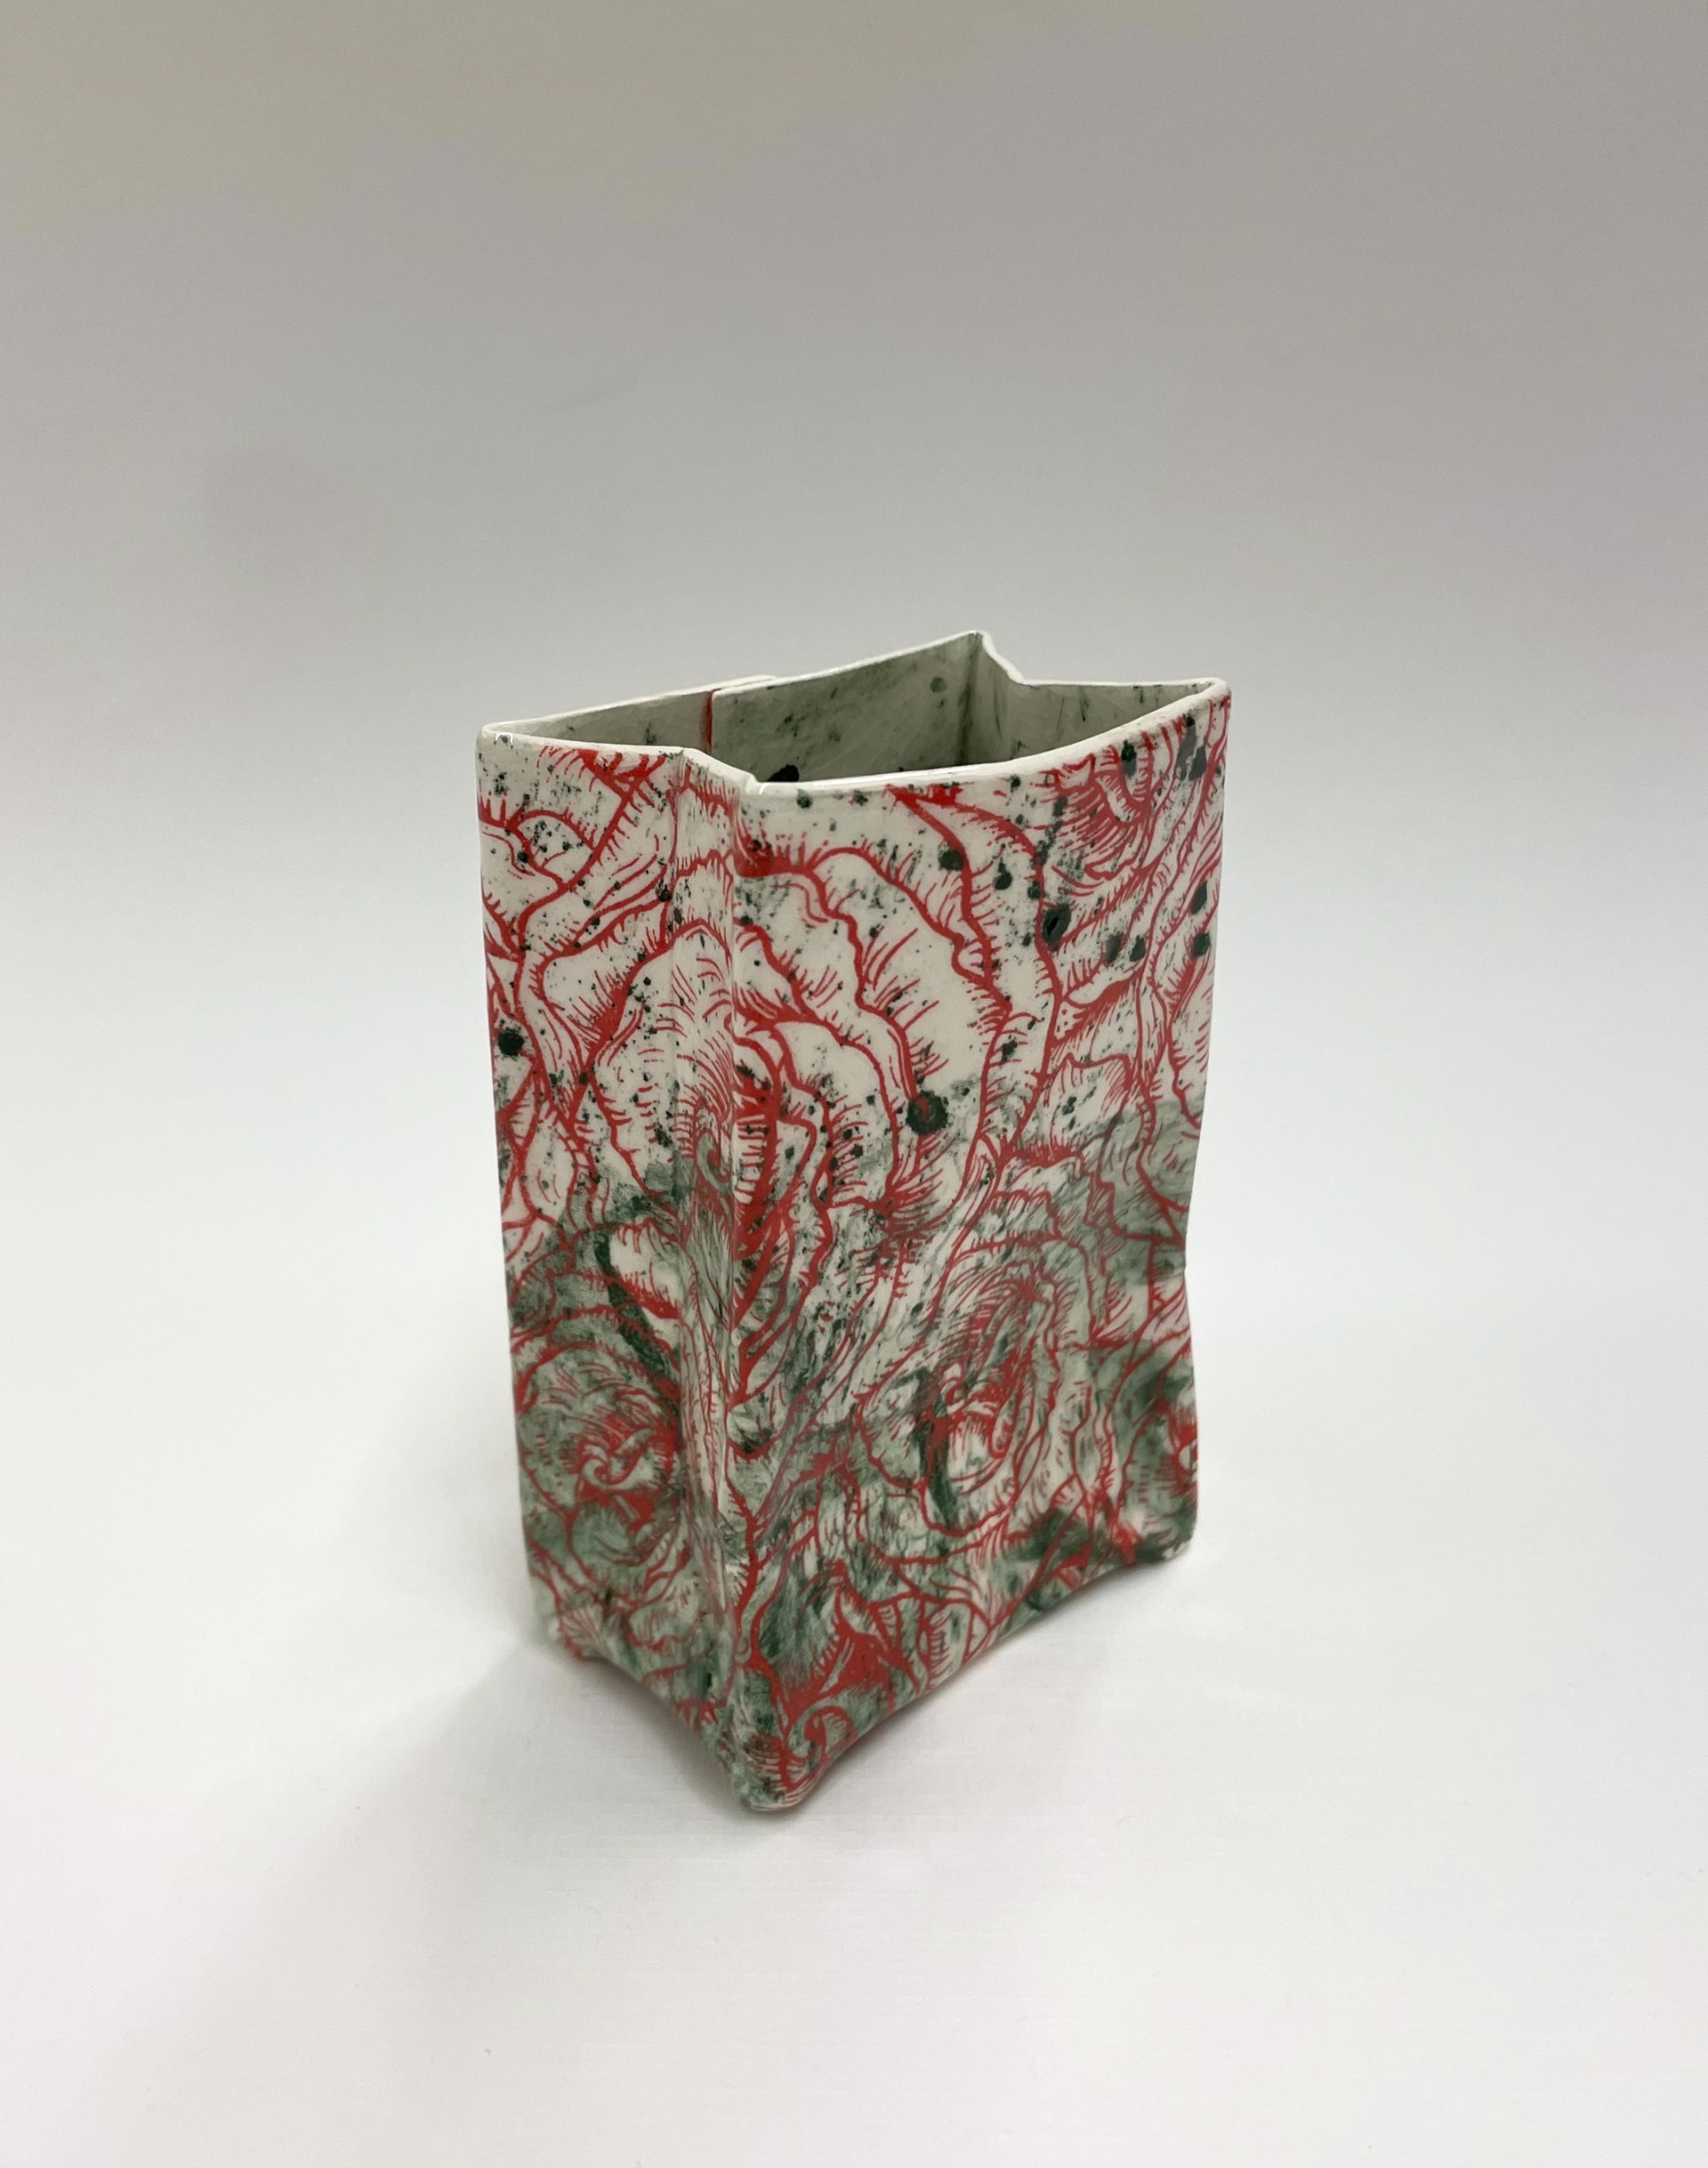 Bag with Red Flowers by Chandra Beadleston